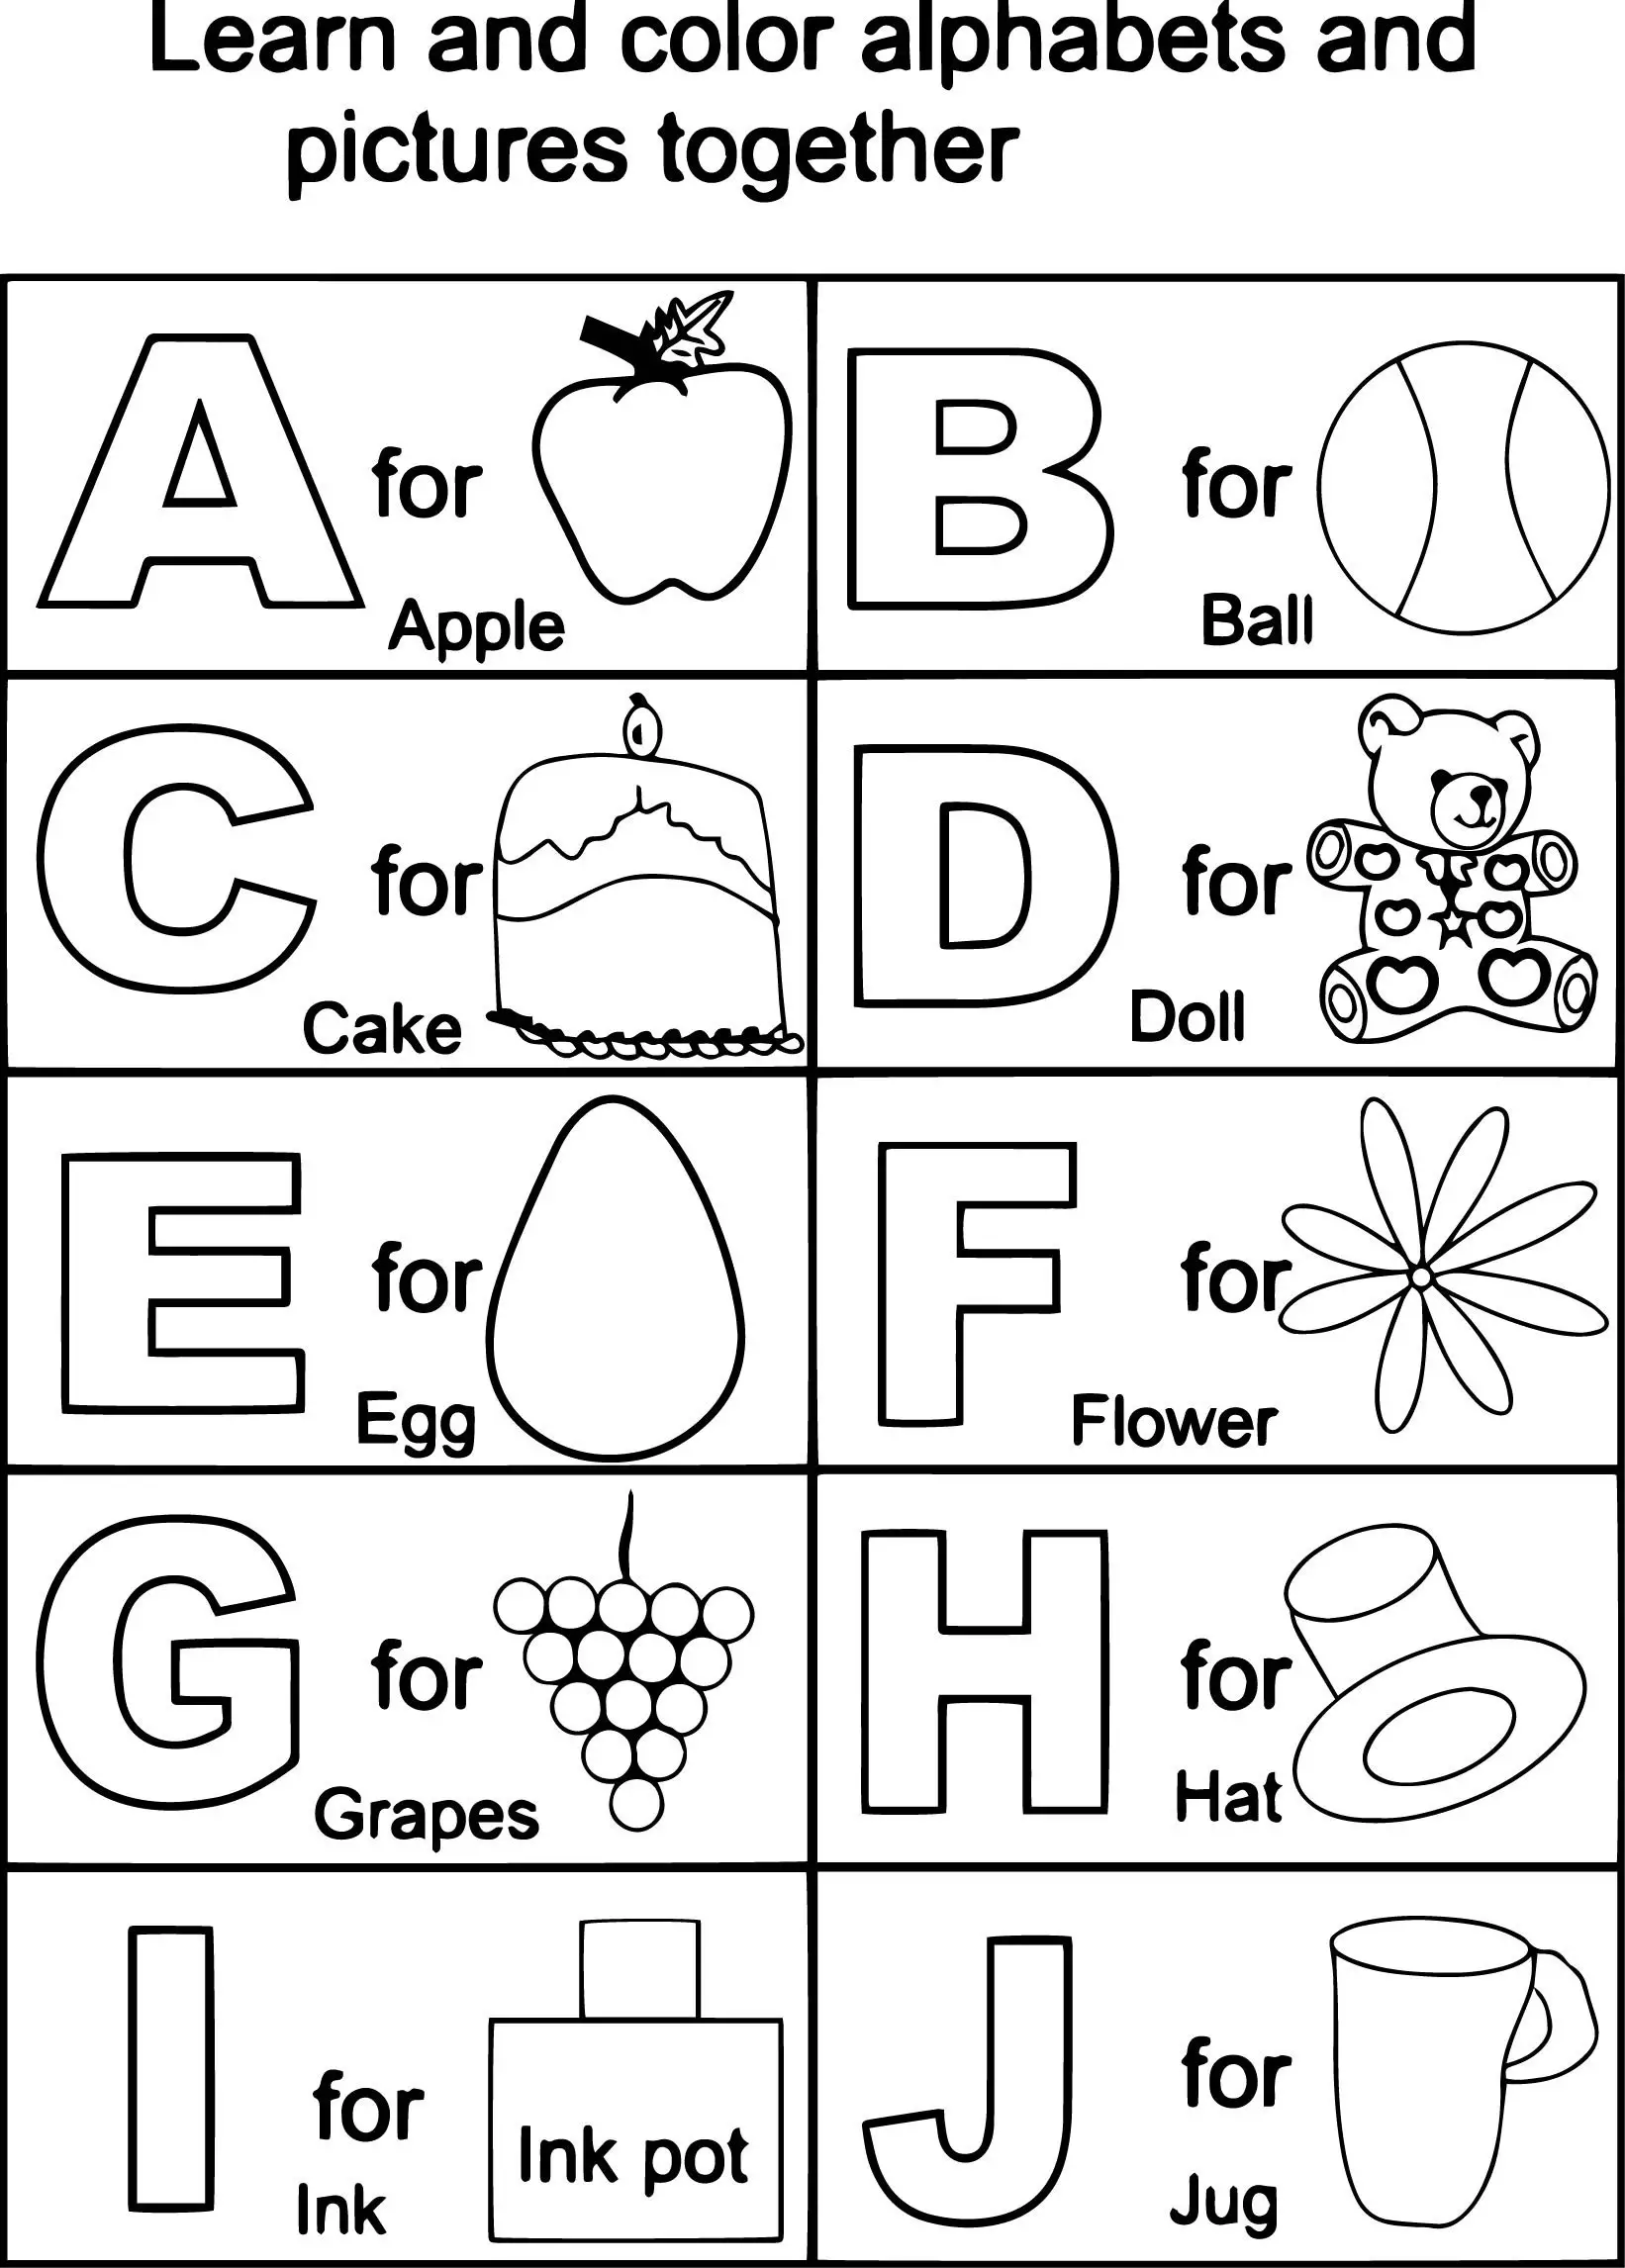 60 Alphabet Flash Cards to Print for Making Learning Fun  